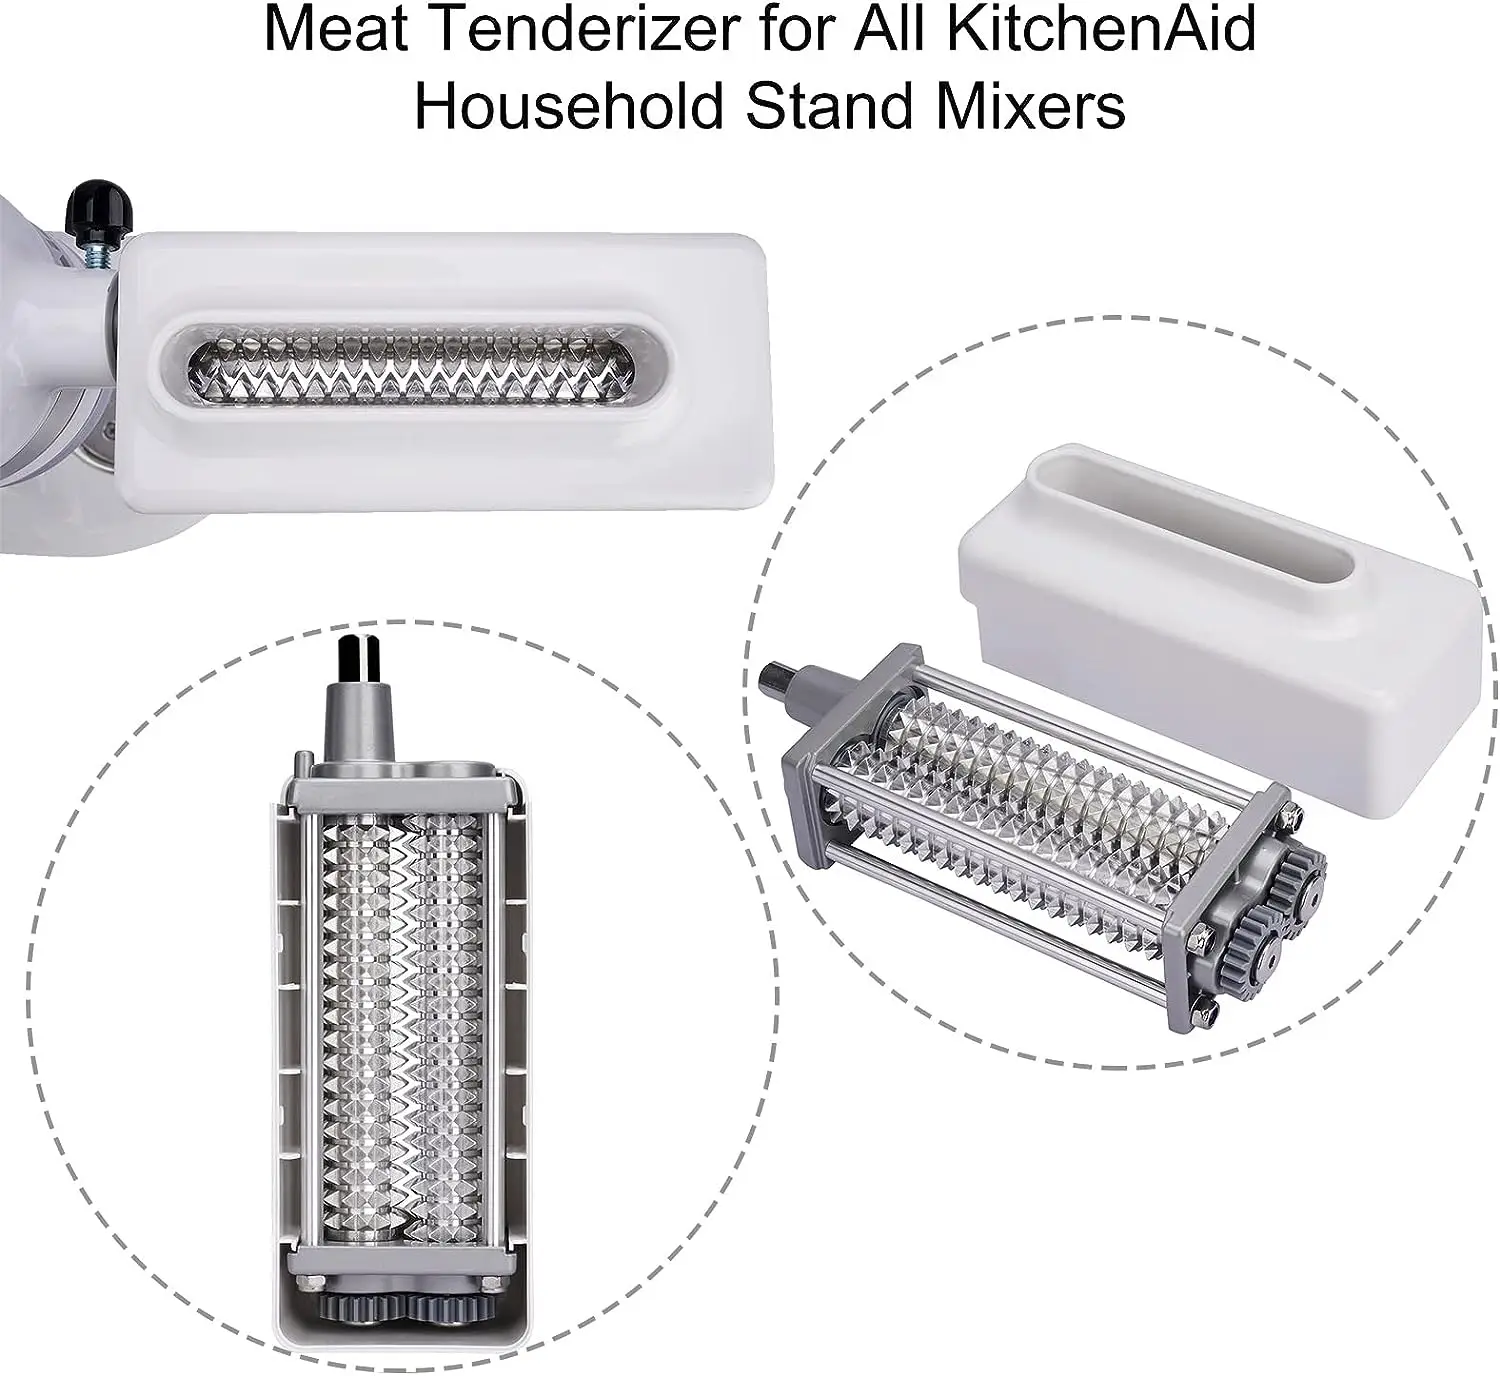 Meat Tenderizer Attachment For KitchenAid Stand Mixer – Meat Tenderizer  Machine Suitable For Use With All KitchenAid Household Stand Mixers